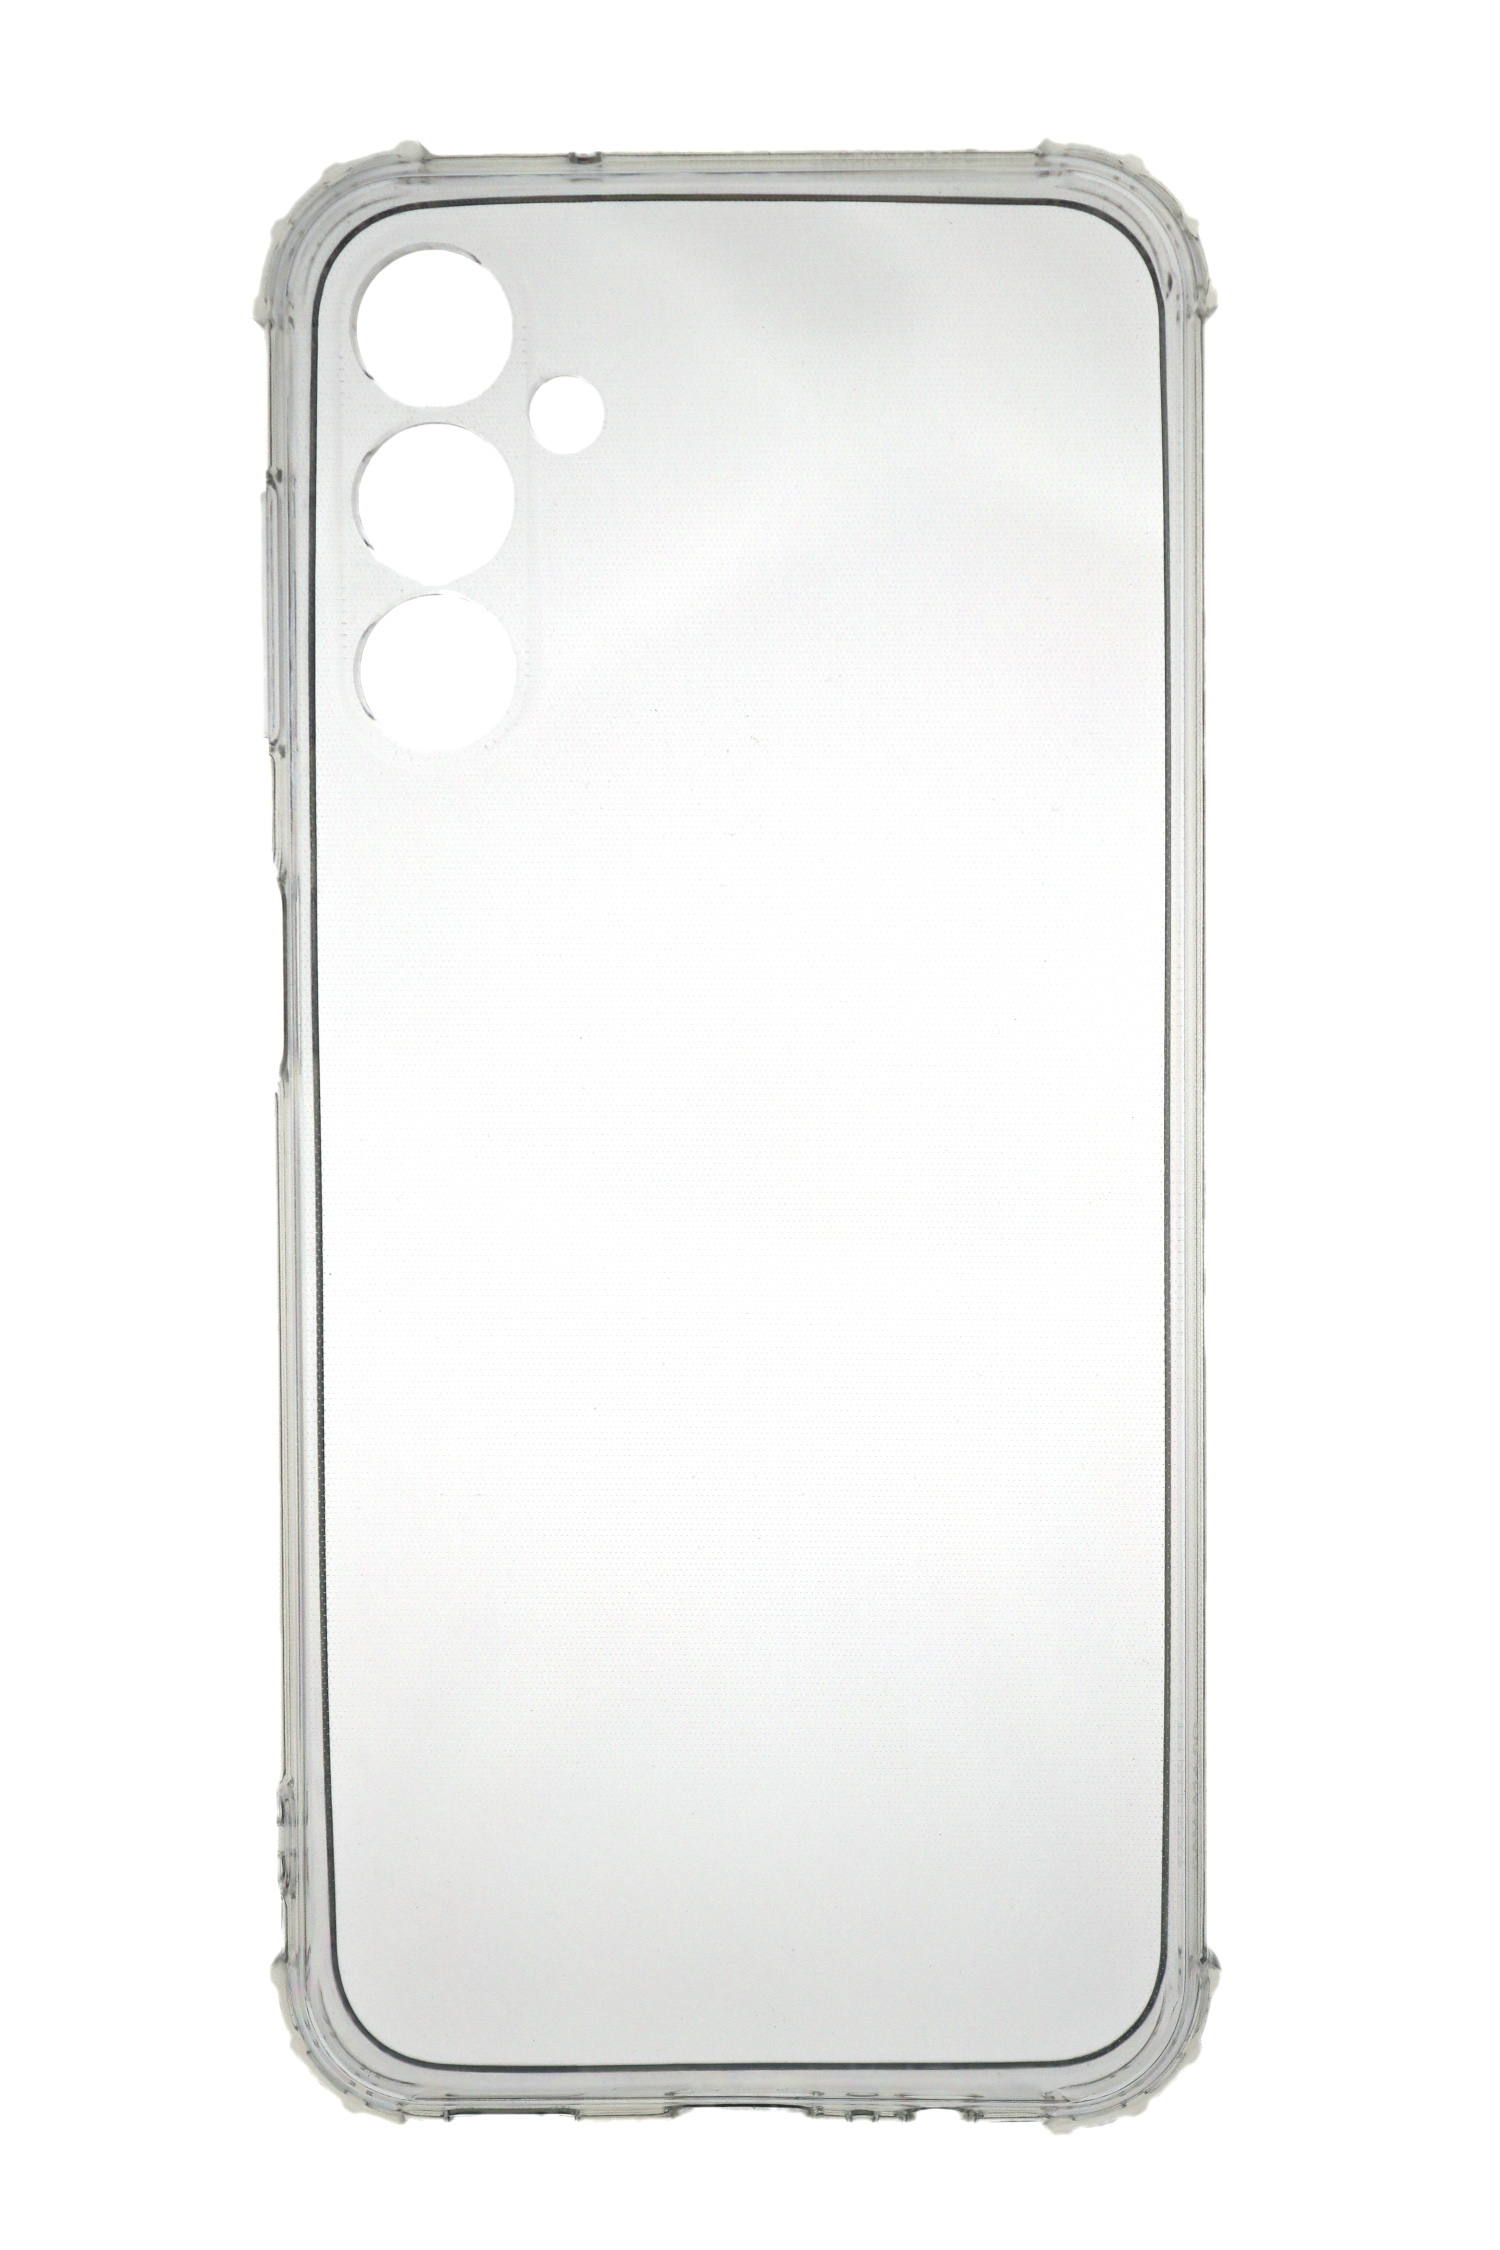 Transparent 5G, mm A14 A14, Case, Galaxy 1.5 Shock Galaxy Anti Samsung, JAMCOVER Backcover,